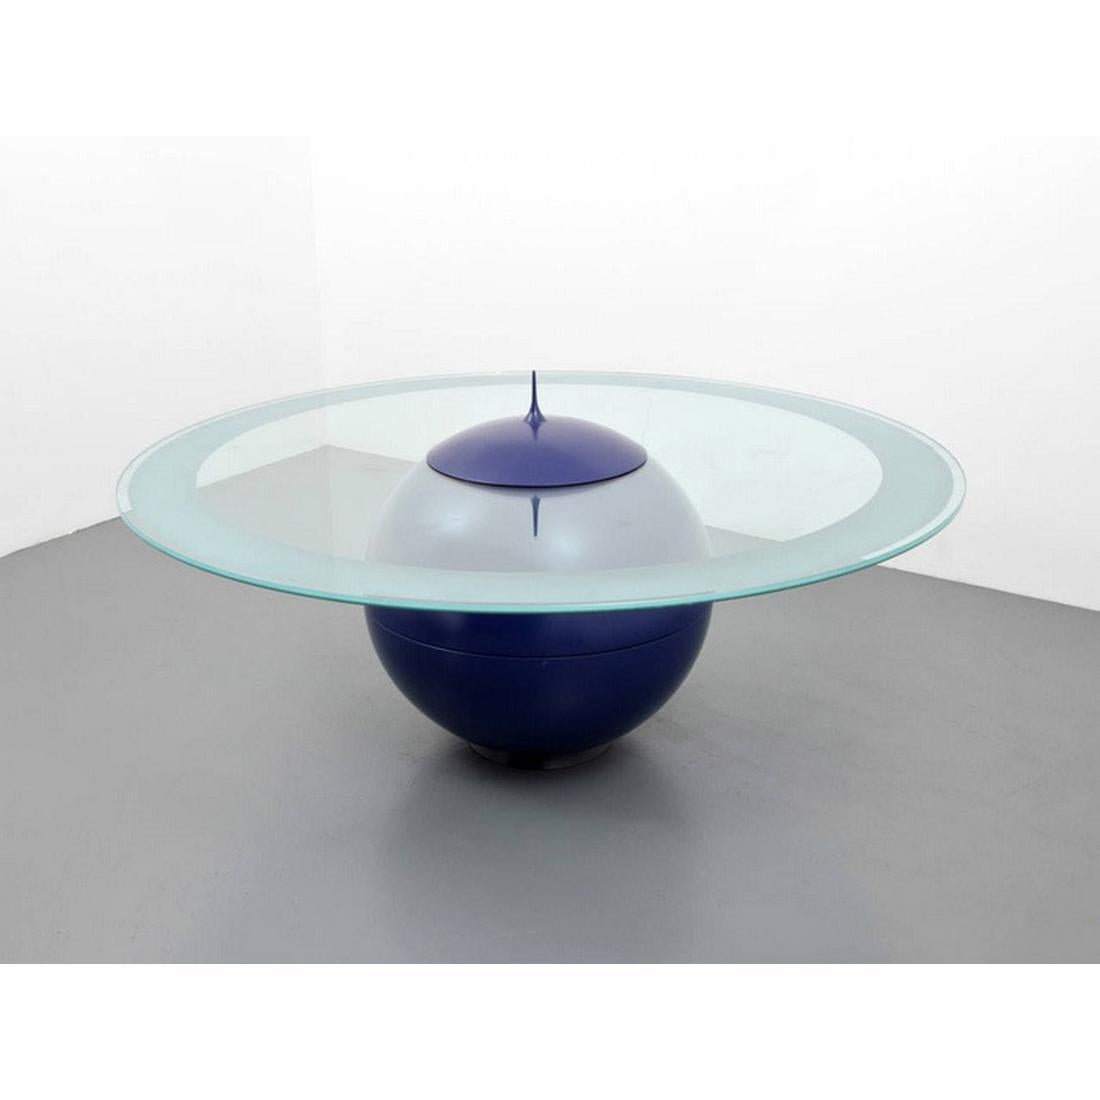 Artist/Designer: Alessandro Mendini (Italian, 1931-2019); Studio Alchimia

Additional Information: Dining or center hall table features a sand blasted etched circular top.

Marking(s); notes: no marking(s) apparent

Country of origin; materials: